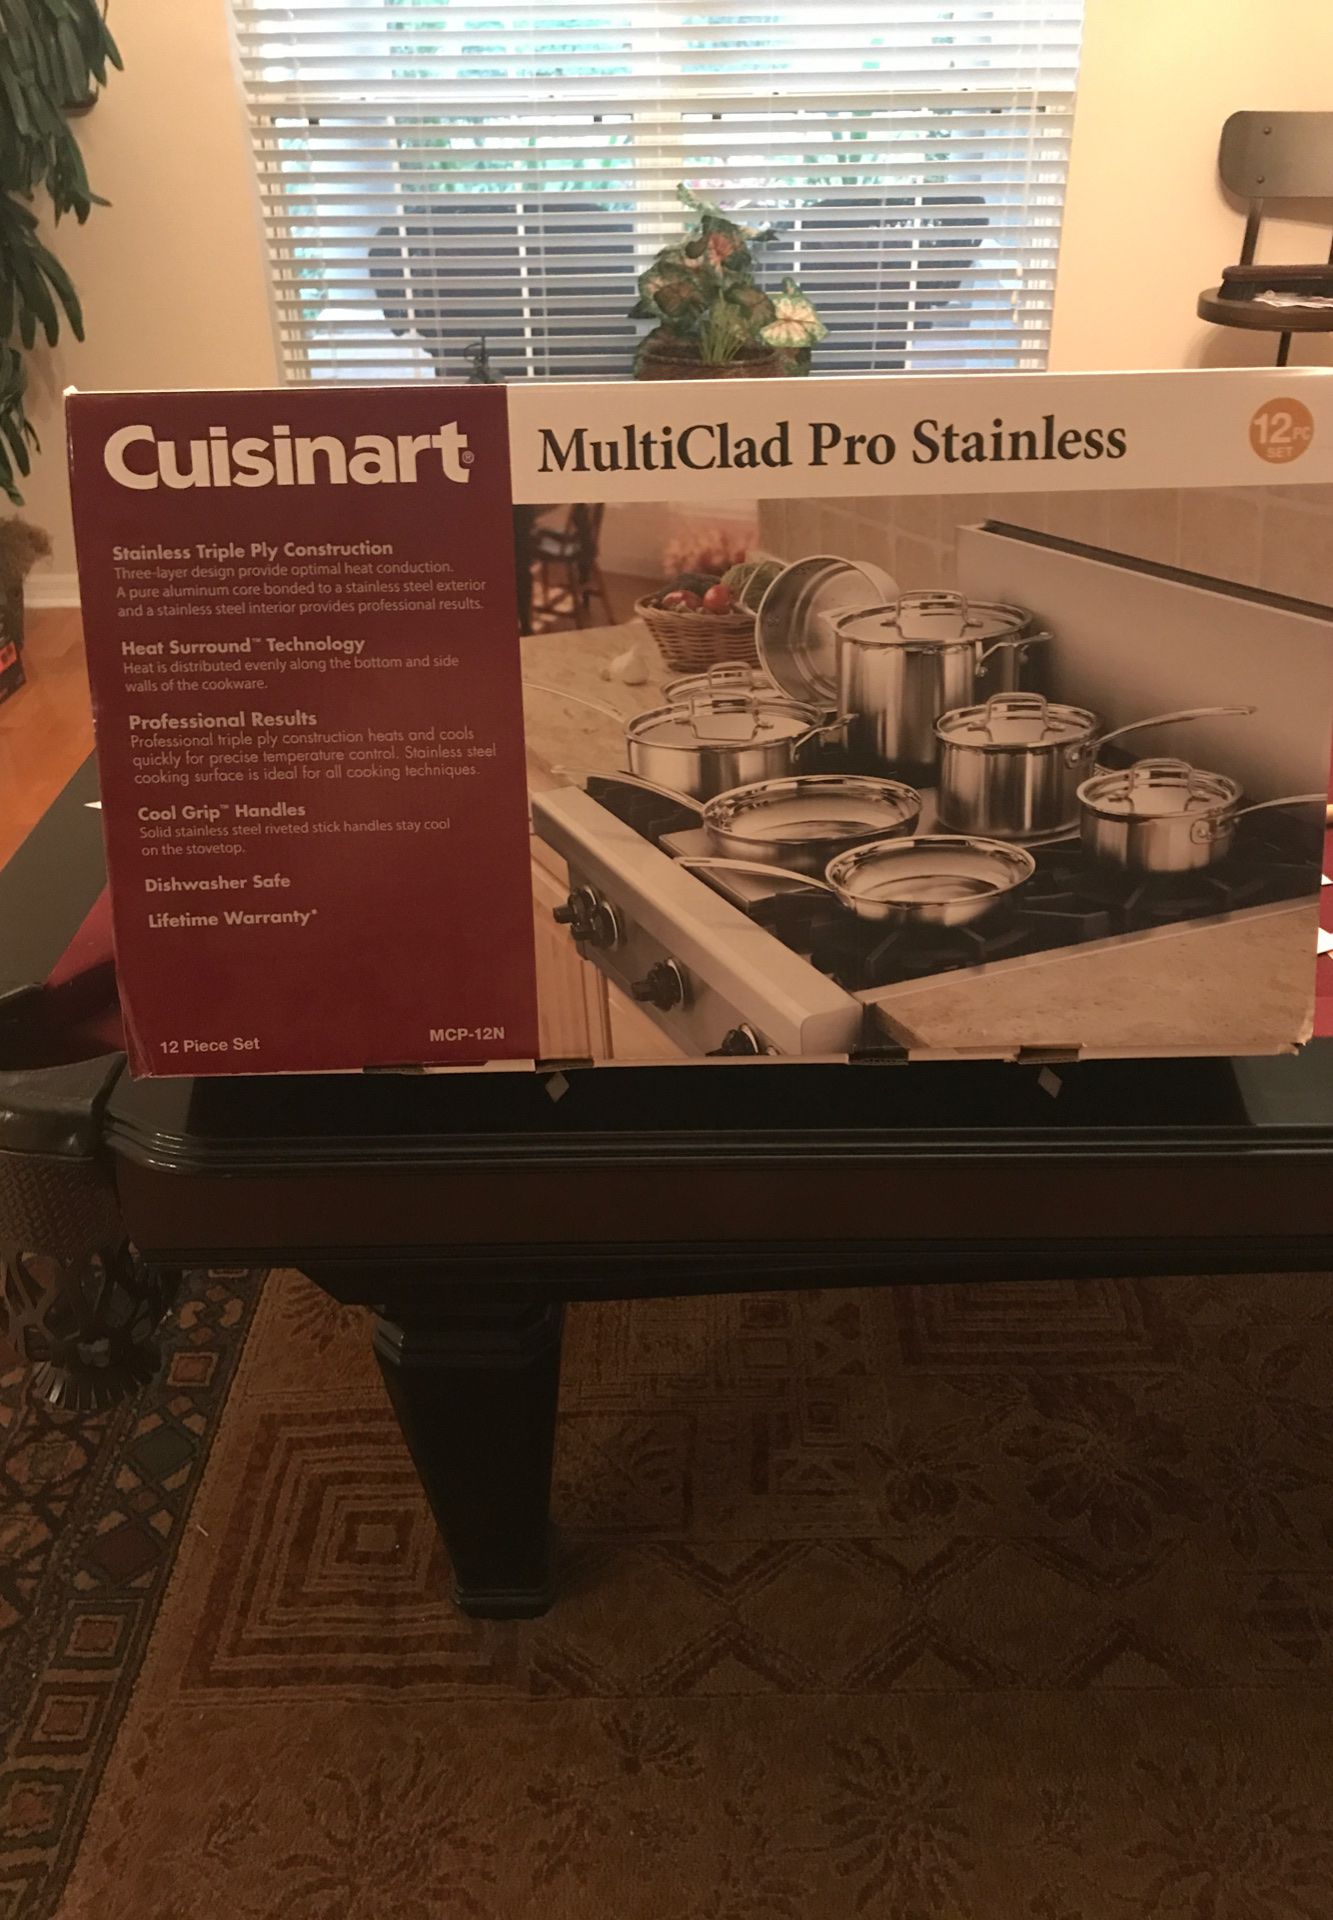 Cuisinart MCP-12N 12 pc Multiclad Pro Stainless Cookware